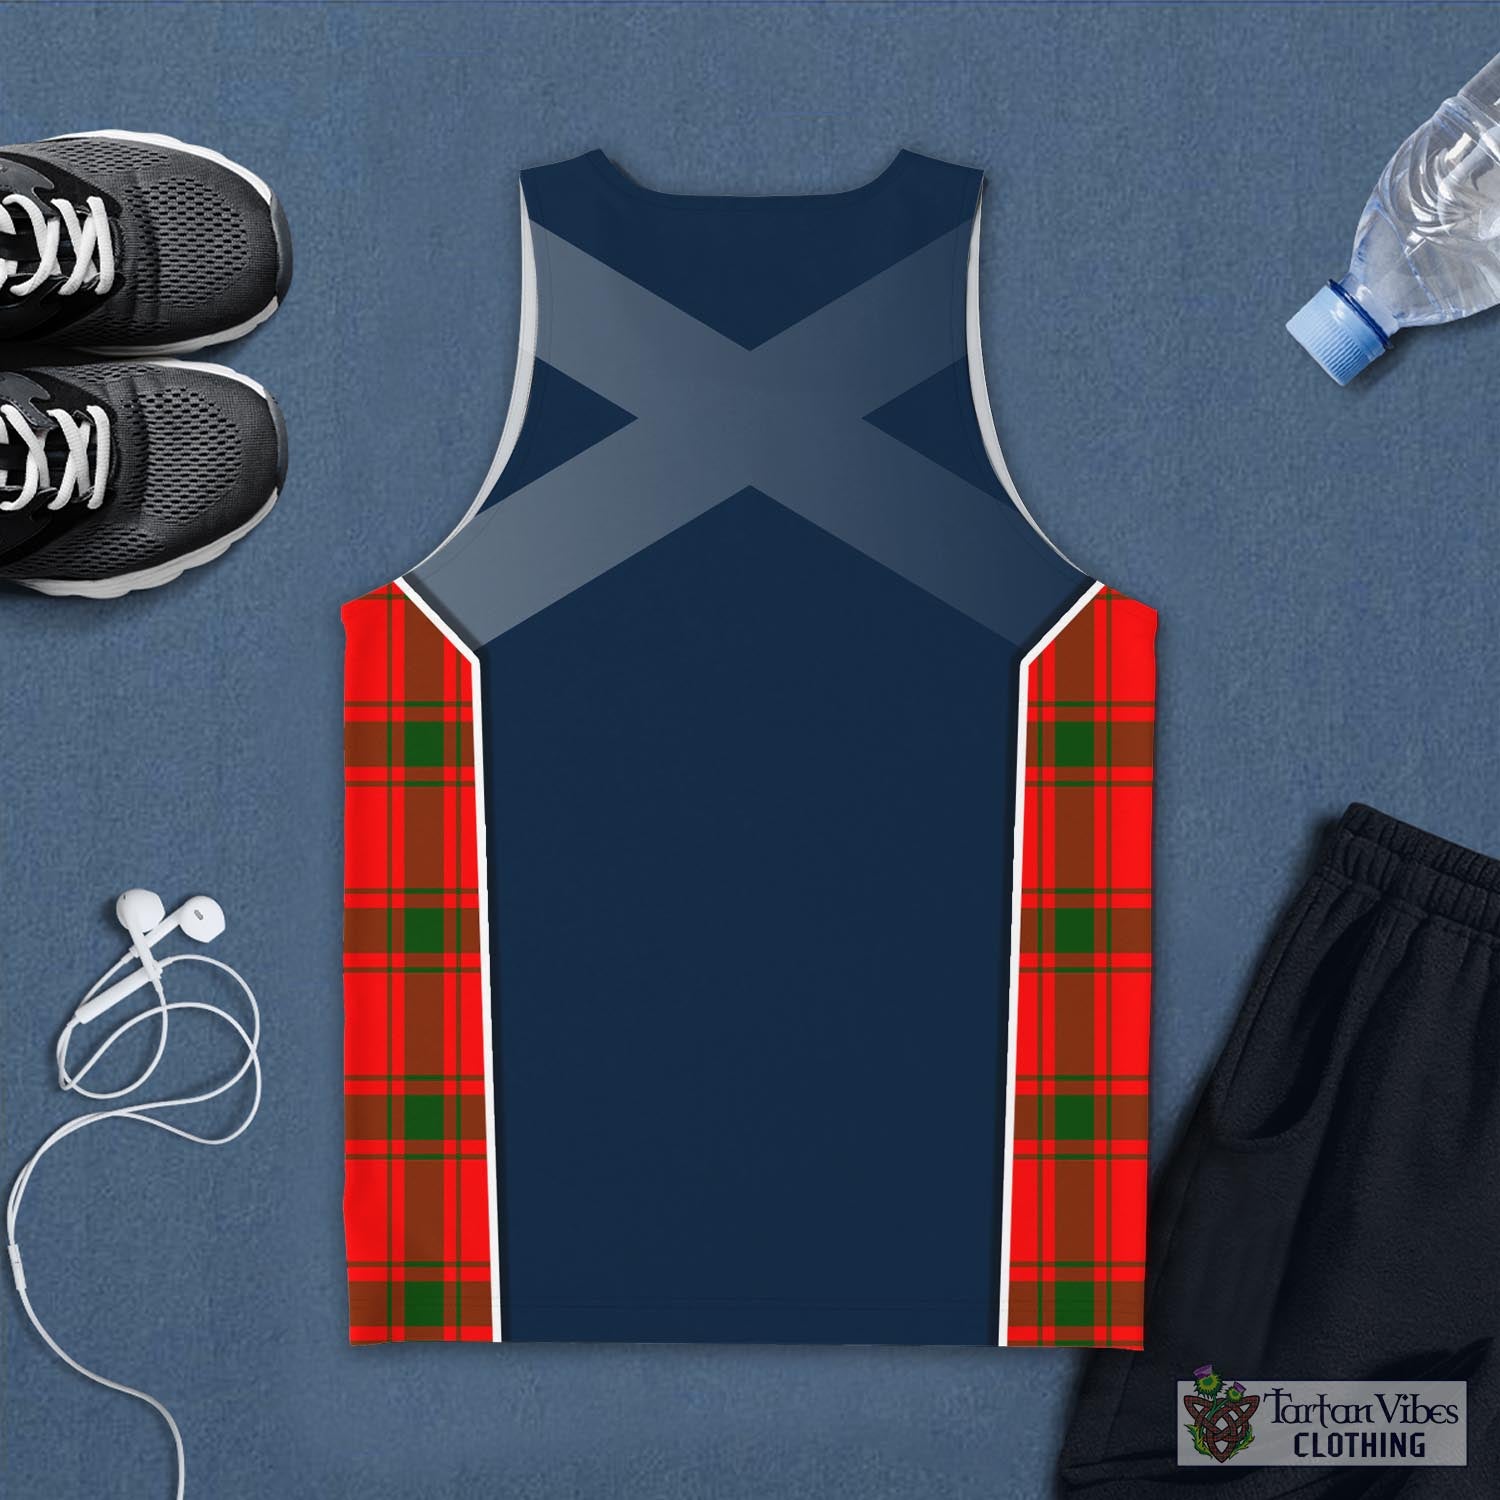 Tartan Vibes Clothing Darroch Tartan Men's Tanks Top with Family Crest and Scottish Thistle Vibes Sport Style